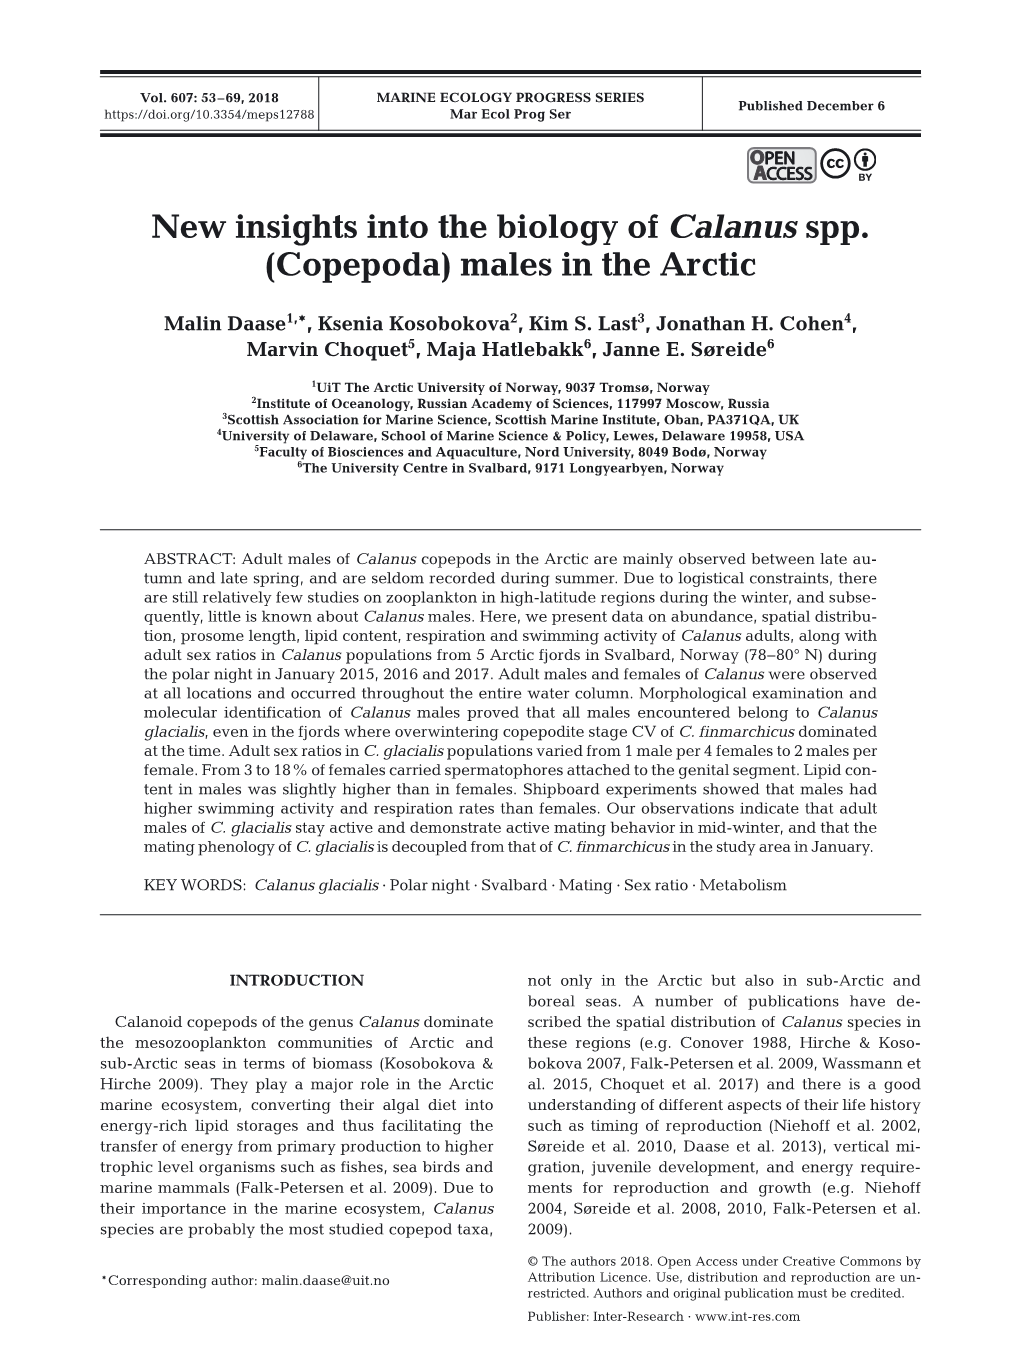 New Insights Into the Biology of Calanus Spp.(Copepoda) Males in the Arctic